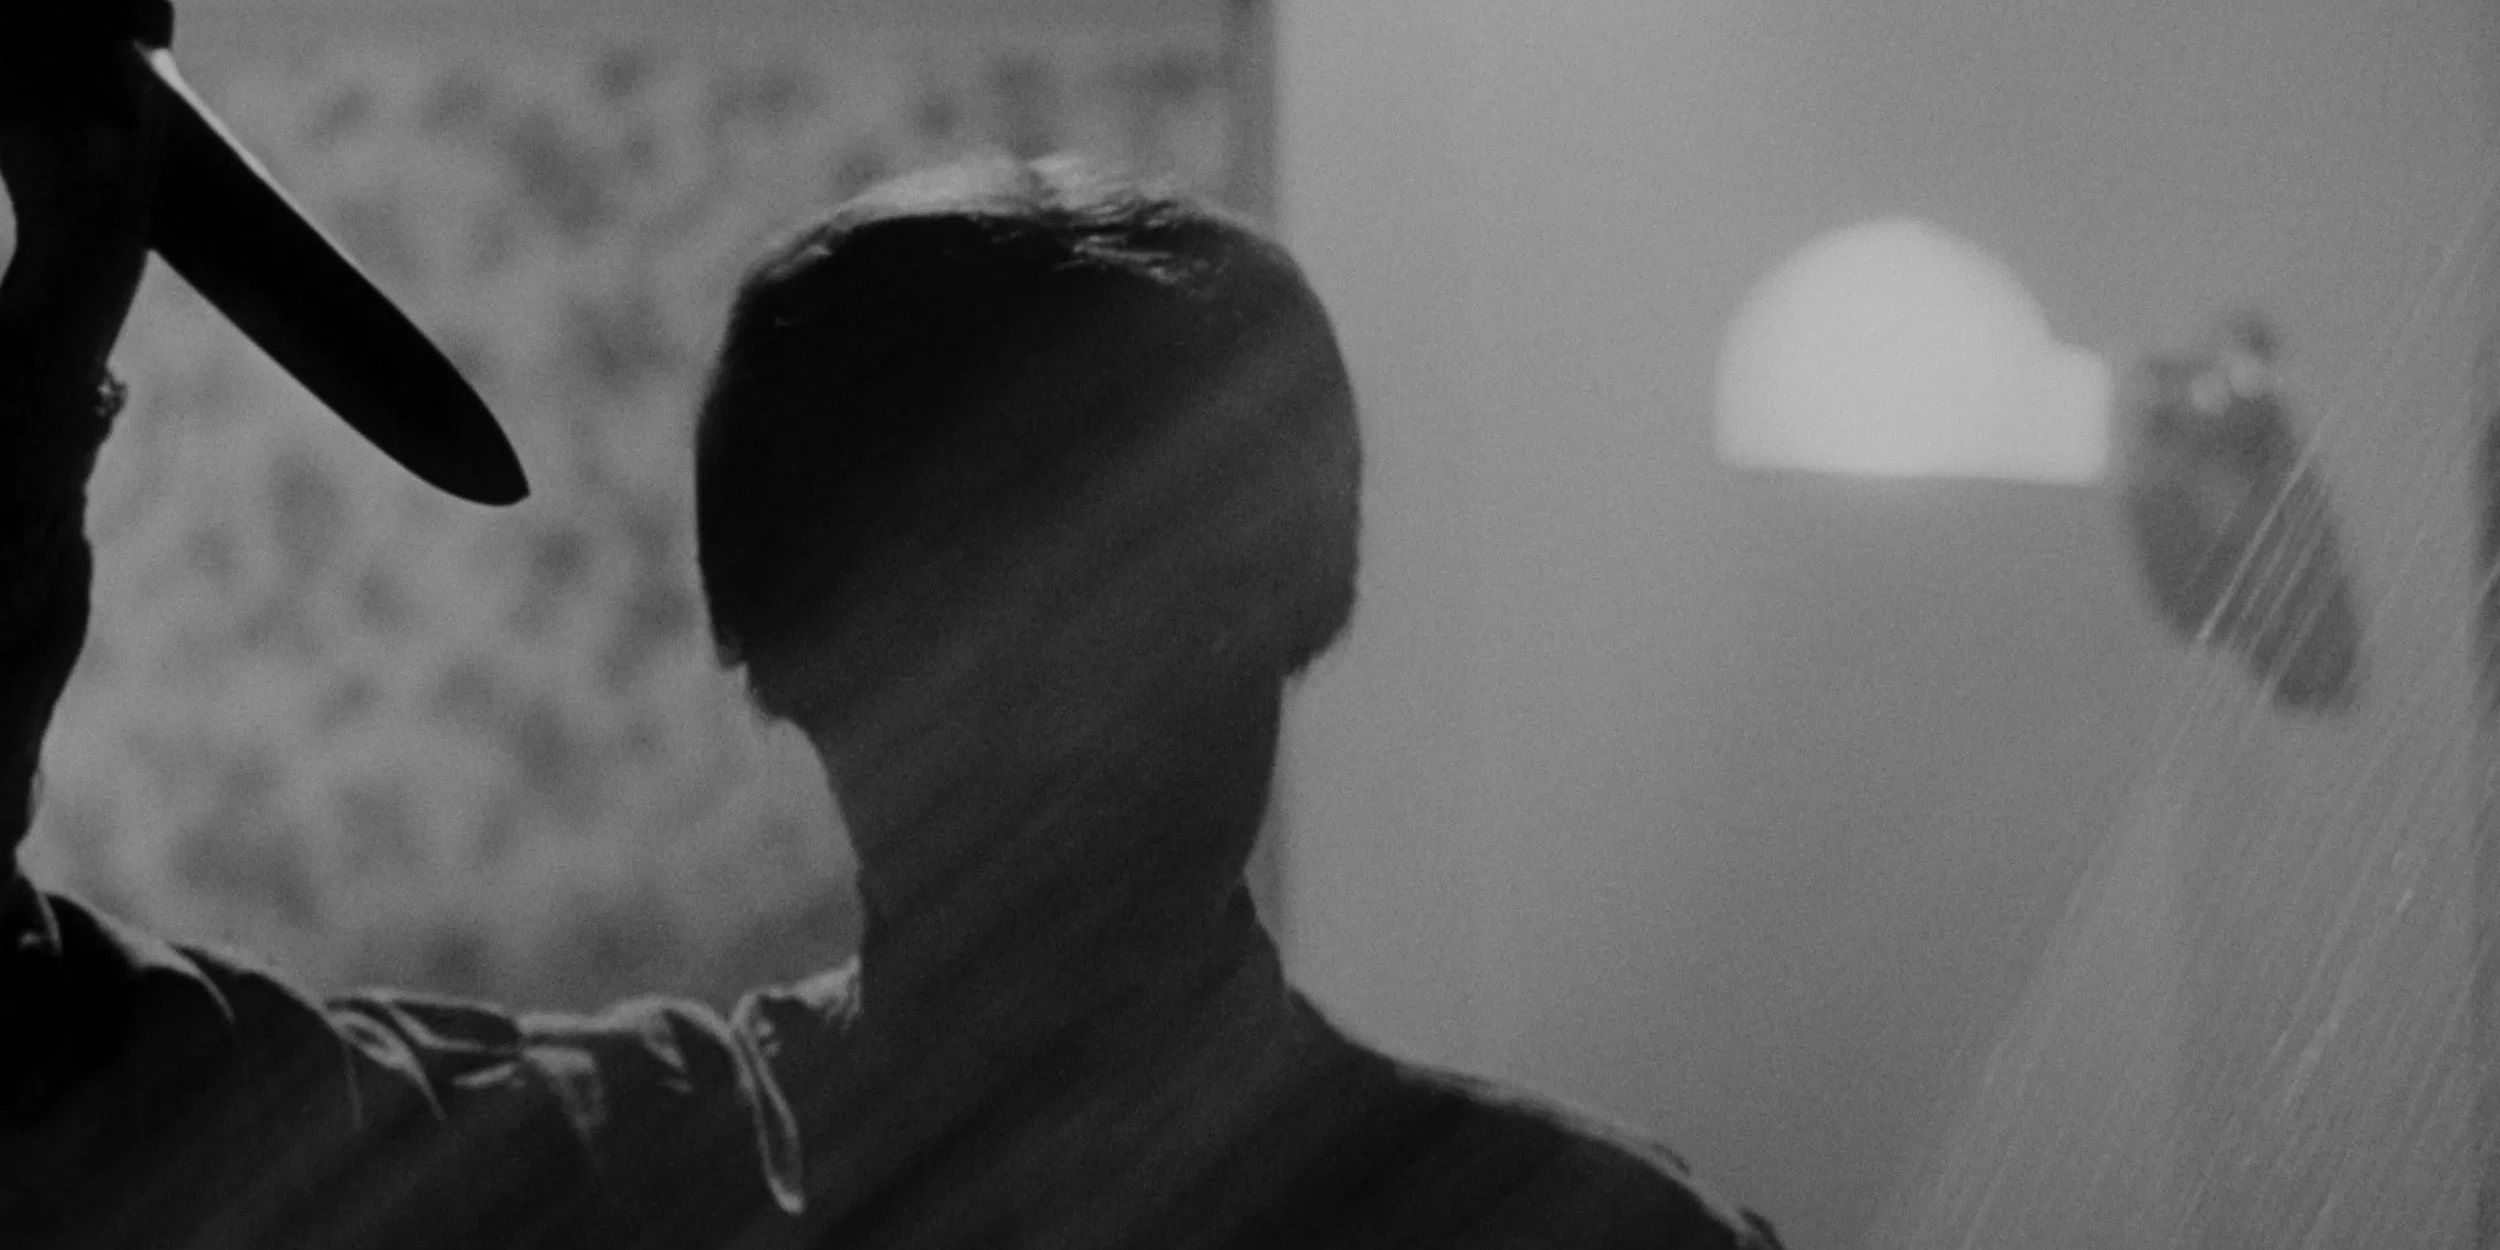 The silhouette of the killer in Psycho